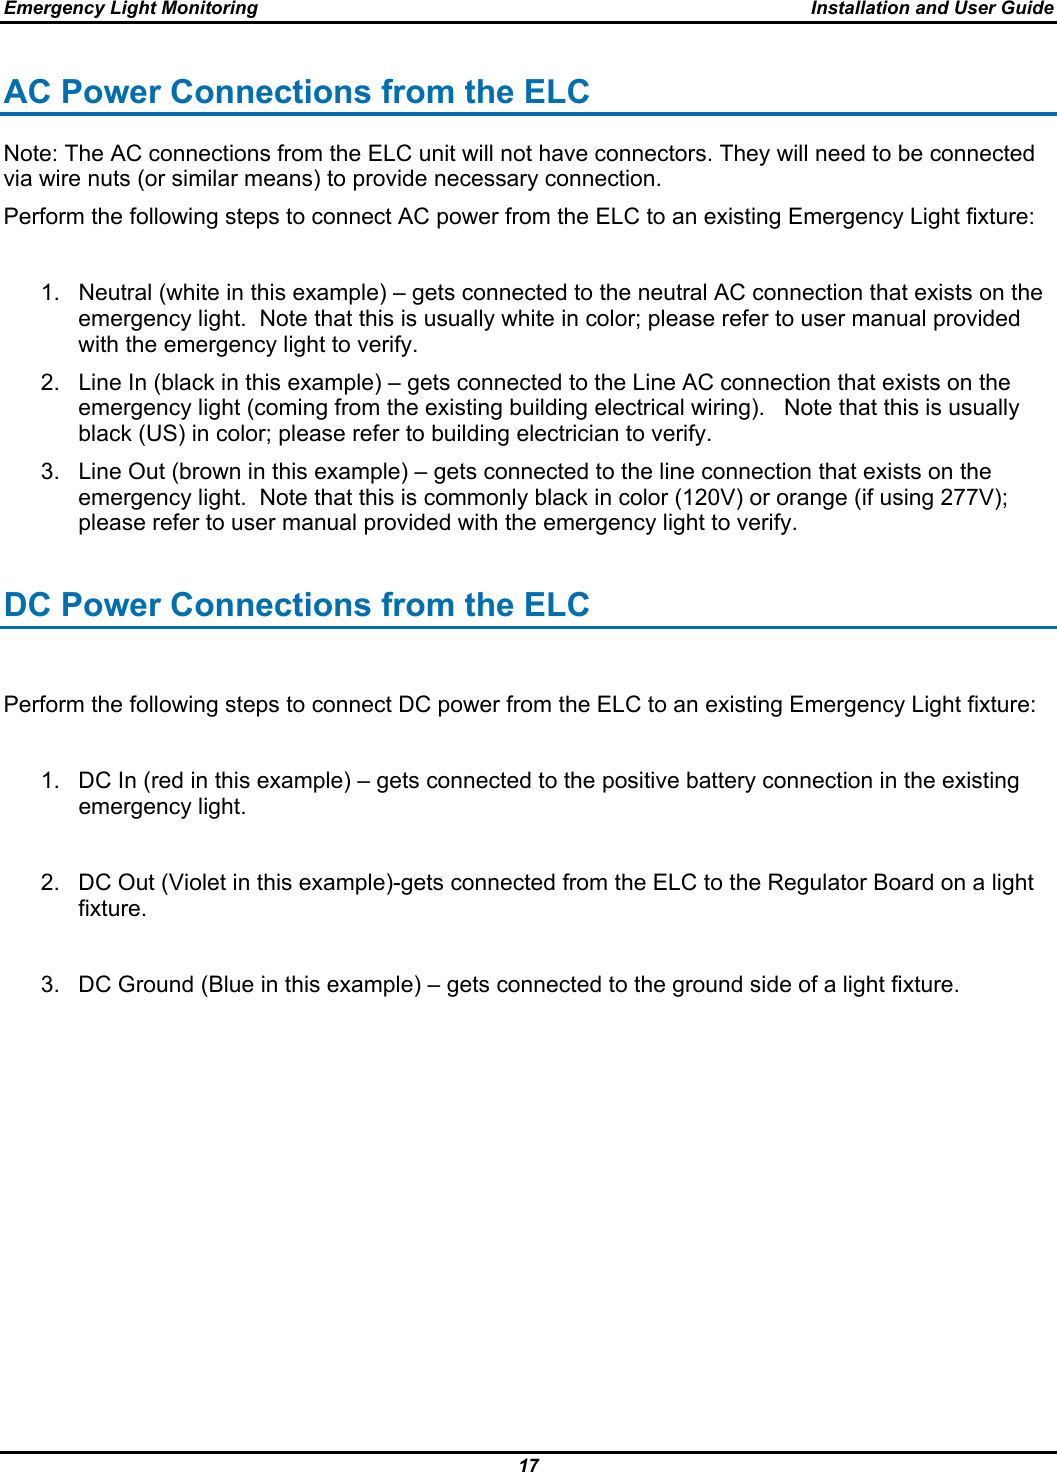 Emergency Light Monitoring  Installation and User Guide 17  AC Power Connections from the ELC Note: The AC connections from the ELC unit will not have connectors. They will need to be connected via wire nuts (or similar means) to provide necessary connection. Perform the following steps to connect AC power from the ELC to an existing Emergency Light fixture:  1.  Neutral (white in this example) – gets connected to the neutral AC connection that exists on the emergency light.  Note that this is usually white in color; please refer to user manual provided with the emergency light to verify. 2.  Line In (black in this example) – gets connected to the Line AC connection that exists on the emergency light (coming from the existing building electrical wiring).   Note that this is usually black (US) in color; please refer to building electrician to verify. 3.  Line Out (brown in this example) – gets connected to the line connection that exists on the emergency light.  Note that this is commonly black in color (120V) or orange (if using 277V); please refer to user manual provided with the emergency light to verify.  DC Power Connections from the ELC  Perform the following steps to connect DC power from the ELC to an existing Emergency Light fixture:  1.  DC In (red in this example) – gets connected to the positive battery connection in the existing emergency light.  2.  DC Out (Violet in this example)-gets connected from the ELC to the Regulator Board on a light fixture.  3.  DC Ground (Blue in this example) – gets connected to the ground side of a light fixture.  